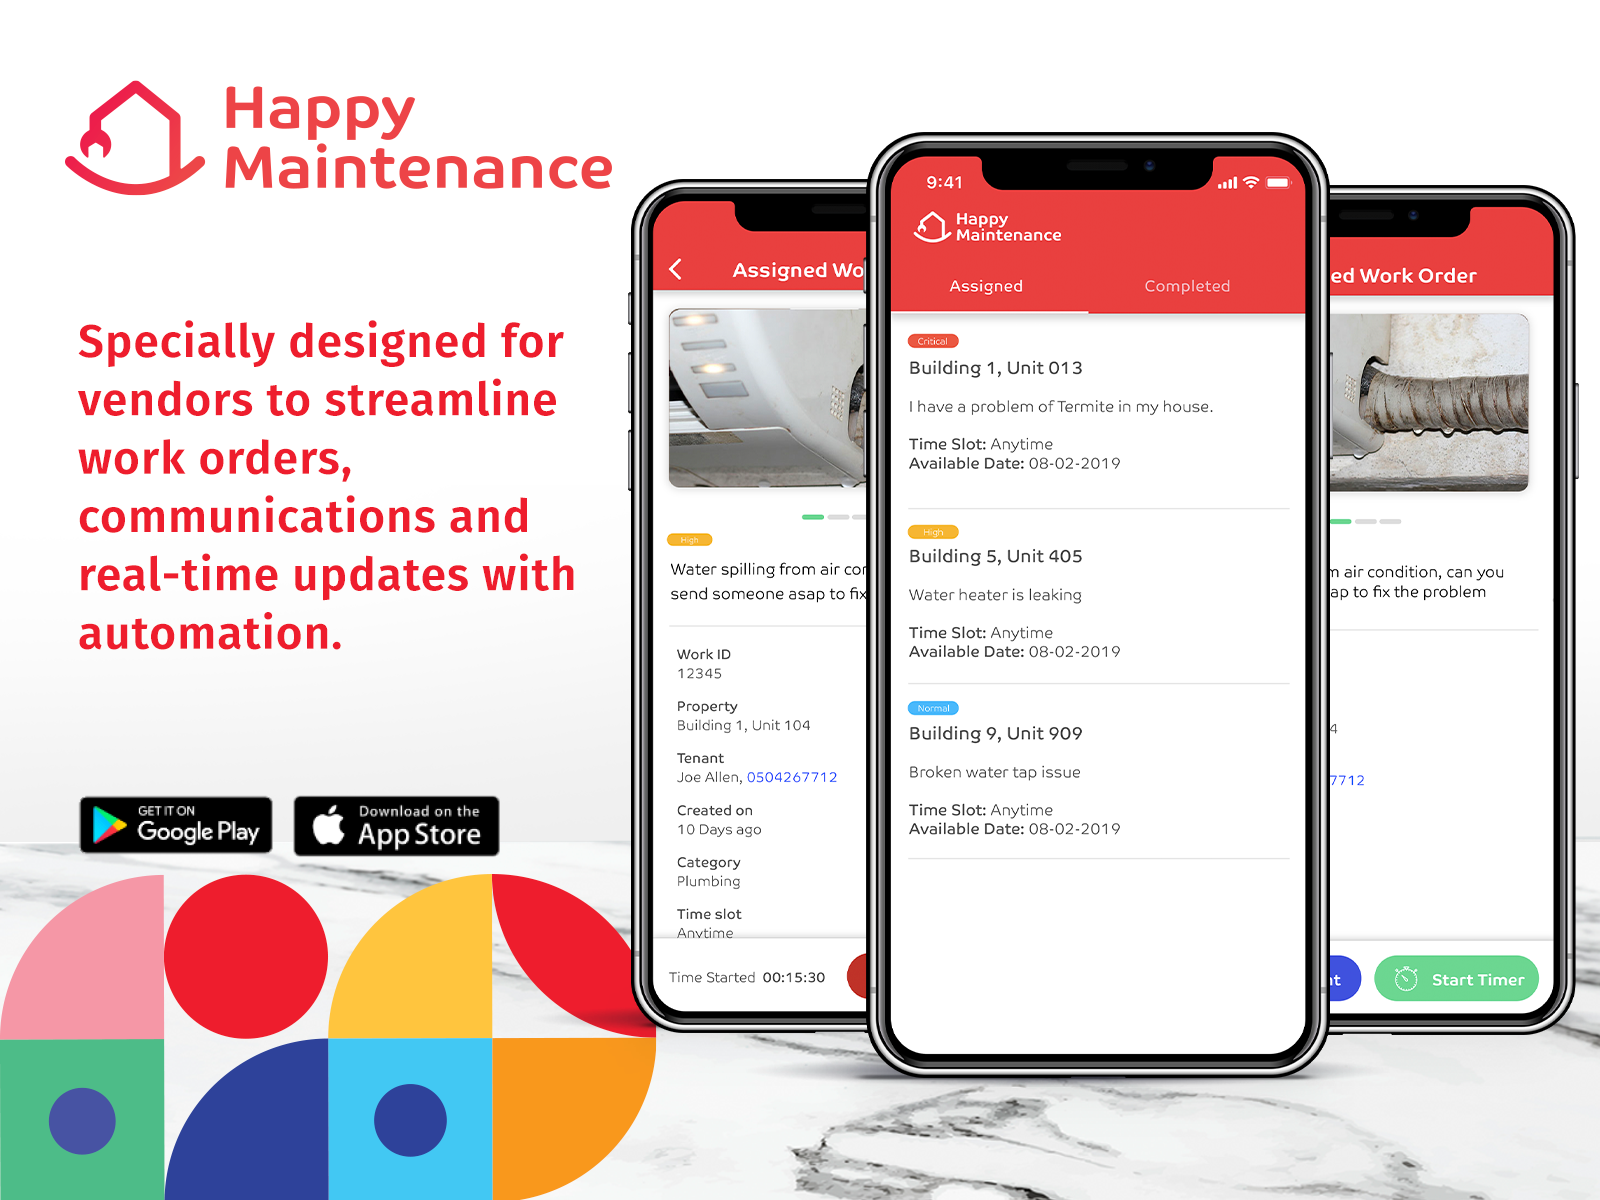 HappyMaintenance - mobile app designed and developed for vendors to streamline the communication, work order assignments and request & approval process between vendors and property managers.